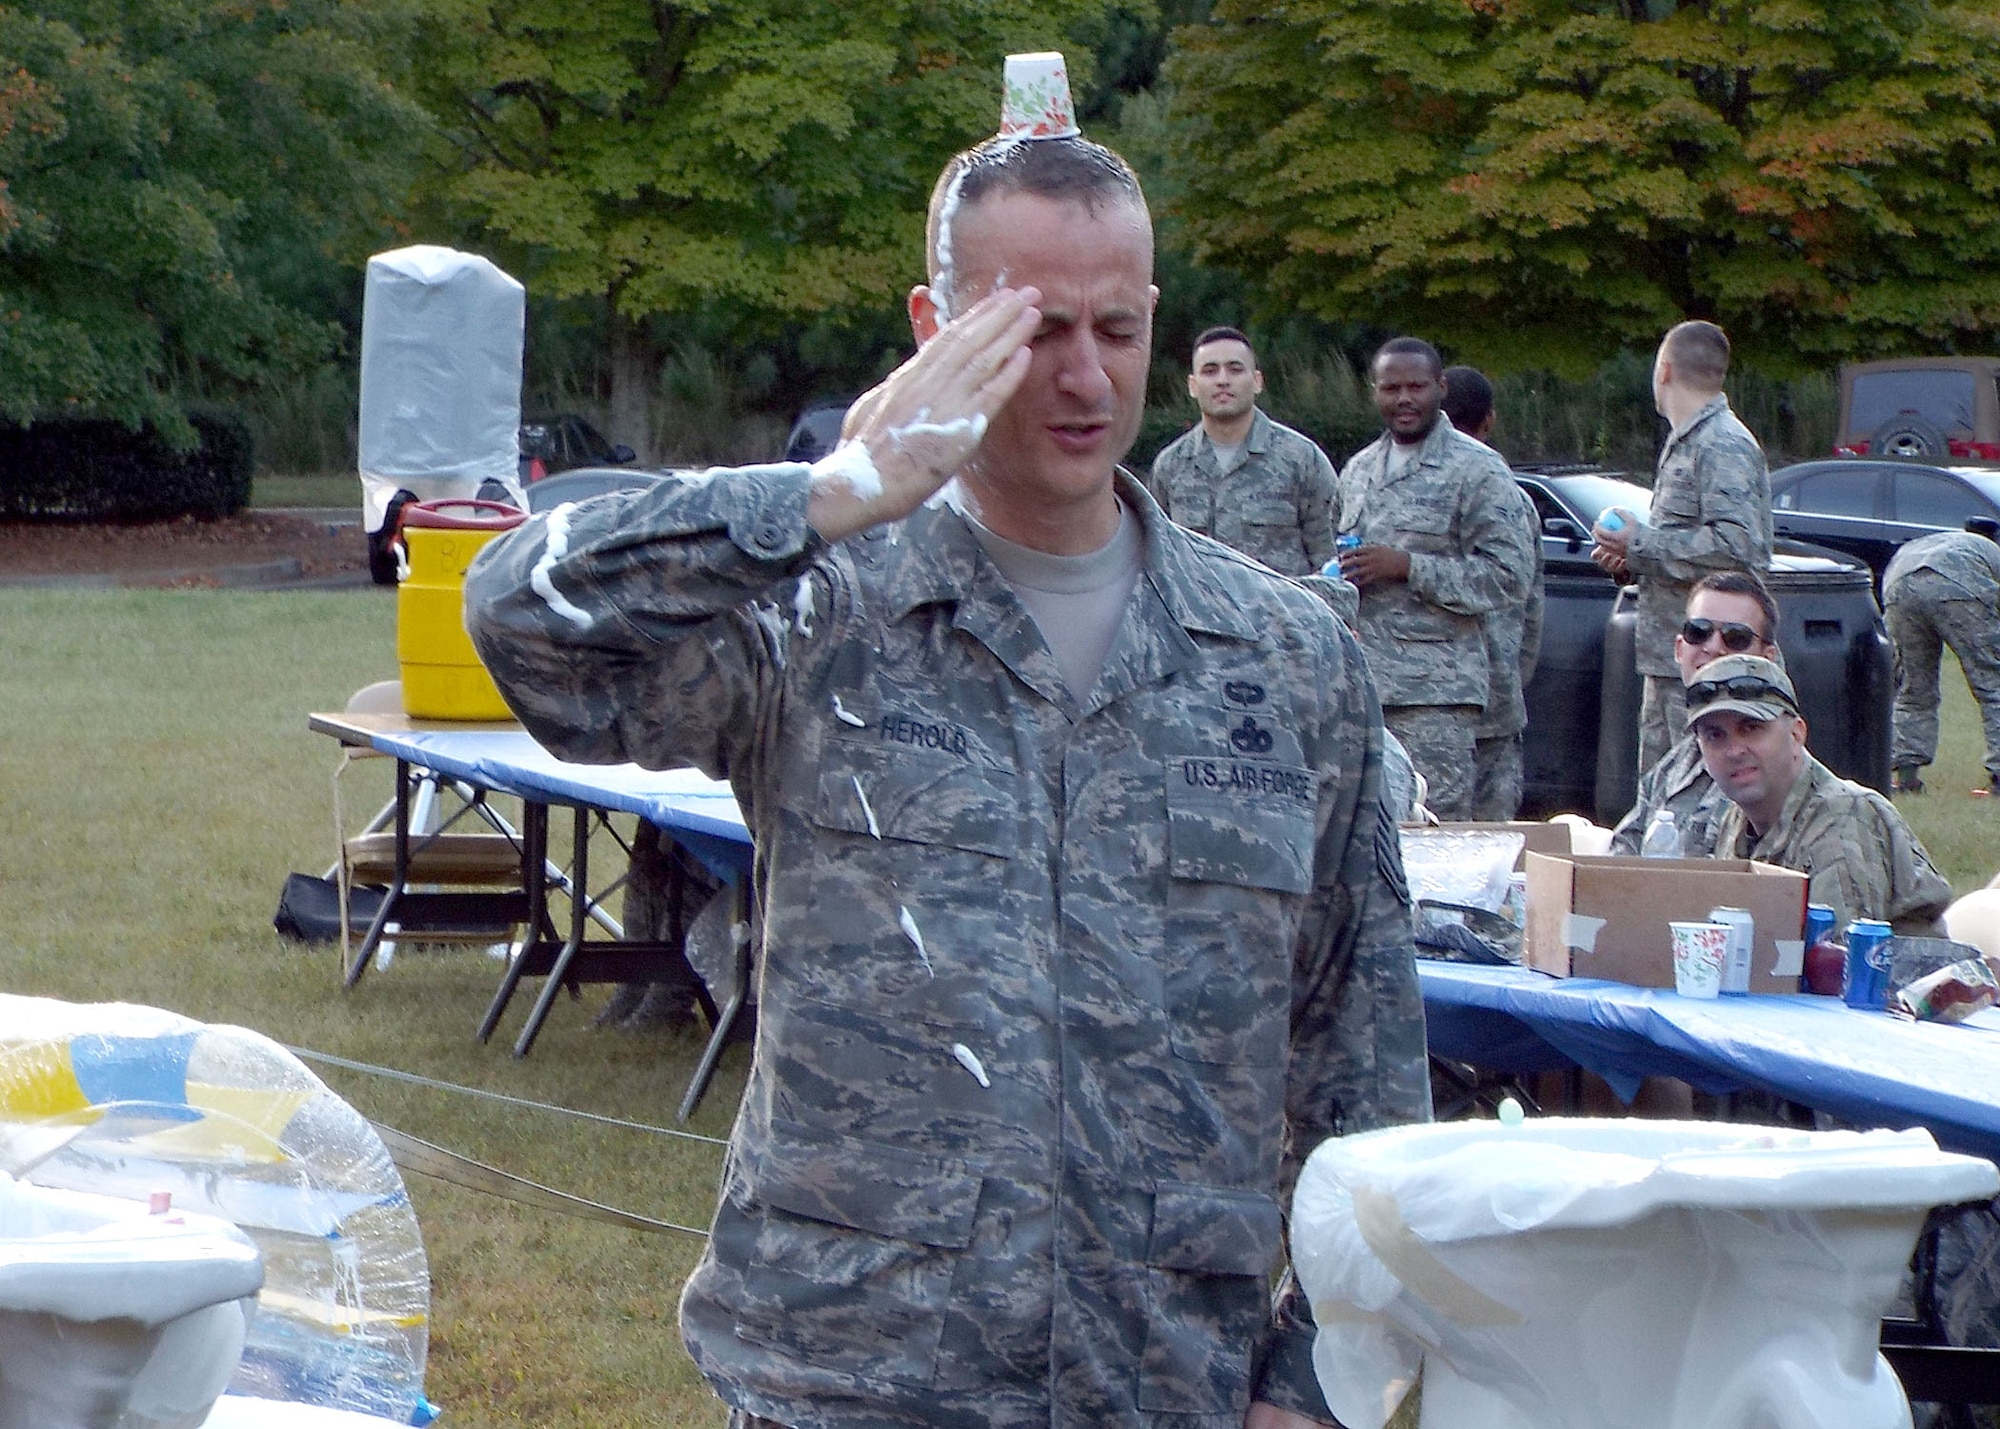 Chief Master Sgt. Jeffrey Herold, 80th Aerial Port Squadron, reports to Maj. Kelly Bronson, 80th APS commander and combat dining in president, after completing the obstacle course at the unit combat dining in Oct. 4, 2014, at Dobbins Air Reserve Base, Ga. The celebration allows Airmen of all ranks to come together and celebrate unit and individual accomplishments. (U.S. Air Force photo by Staff Sgt. Karla Lehman/Released)